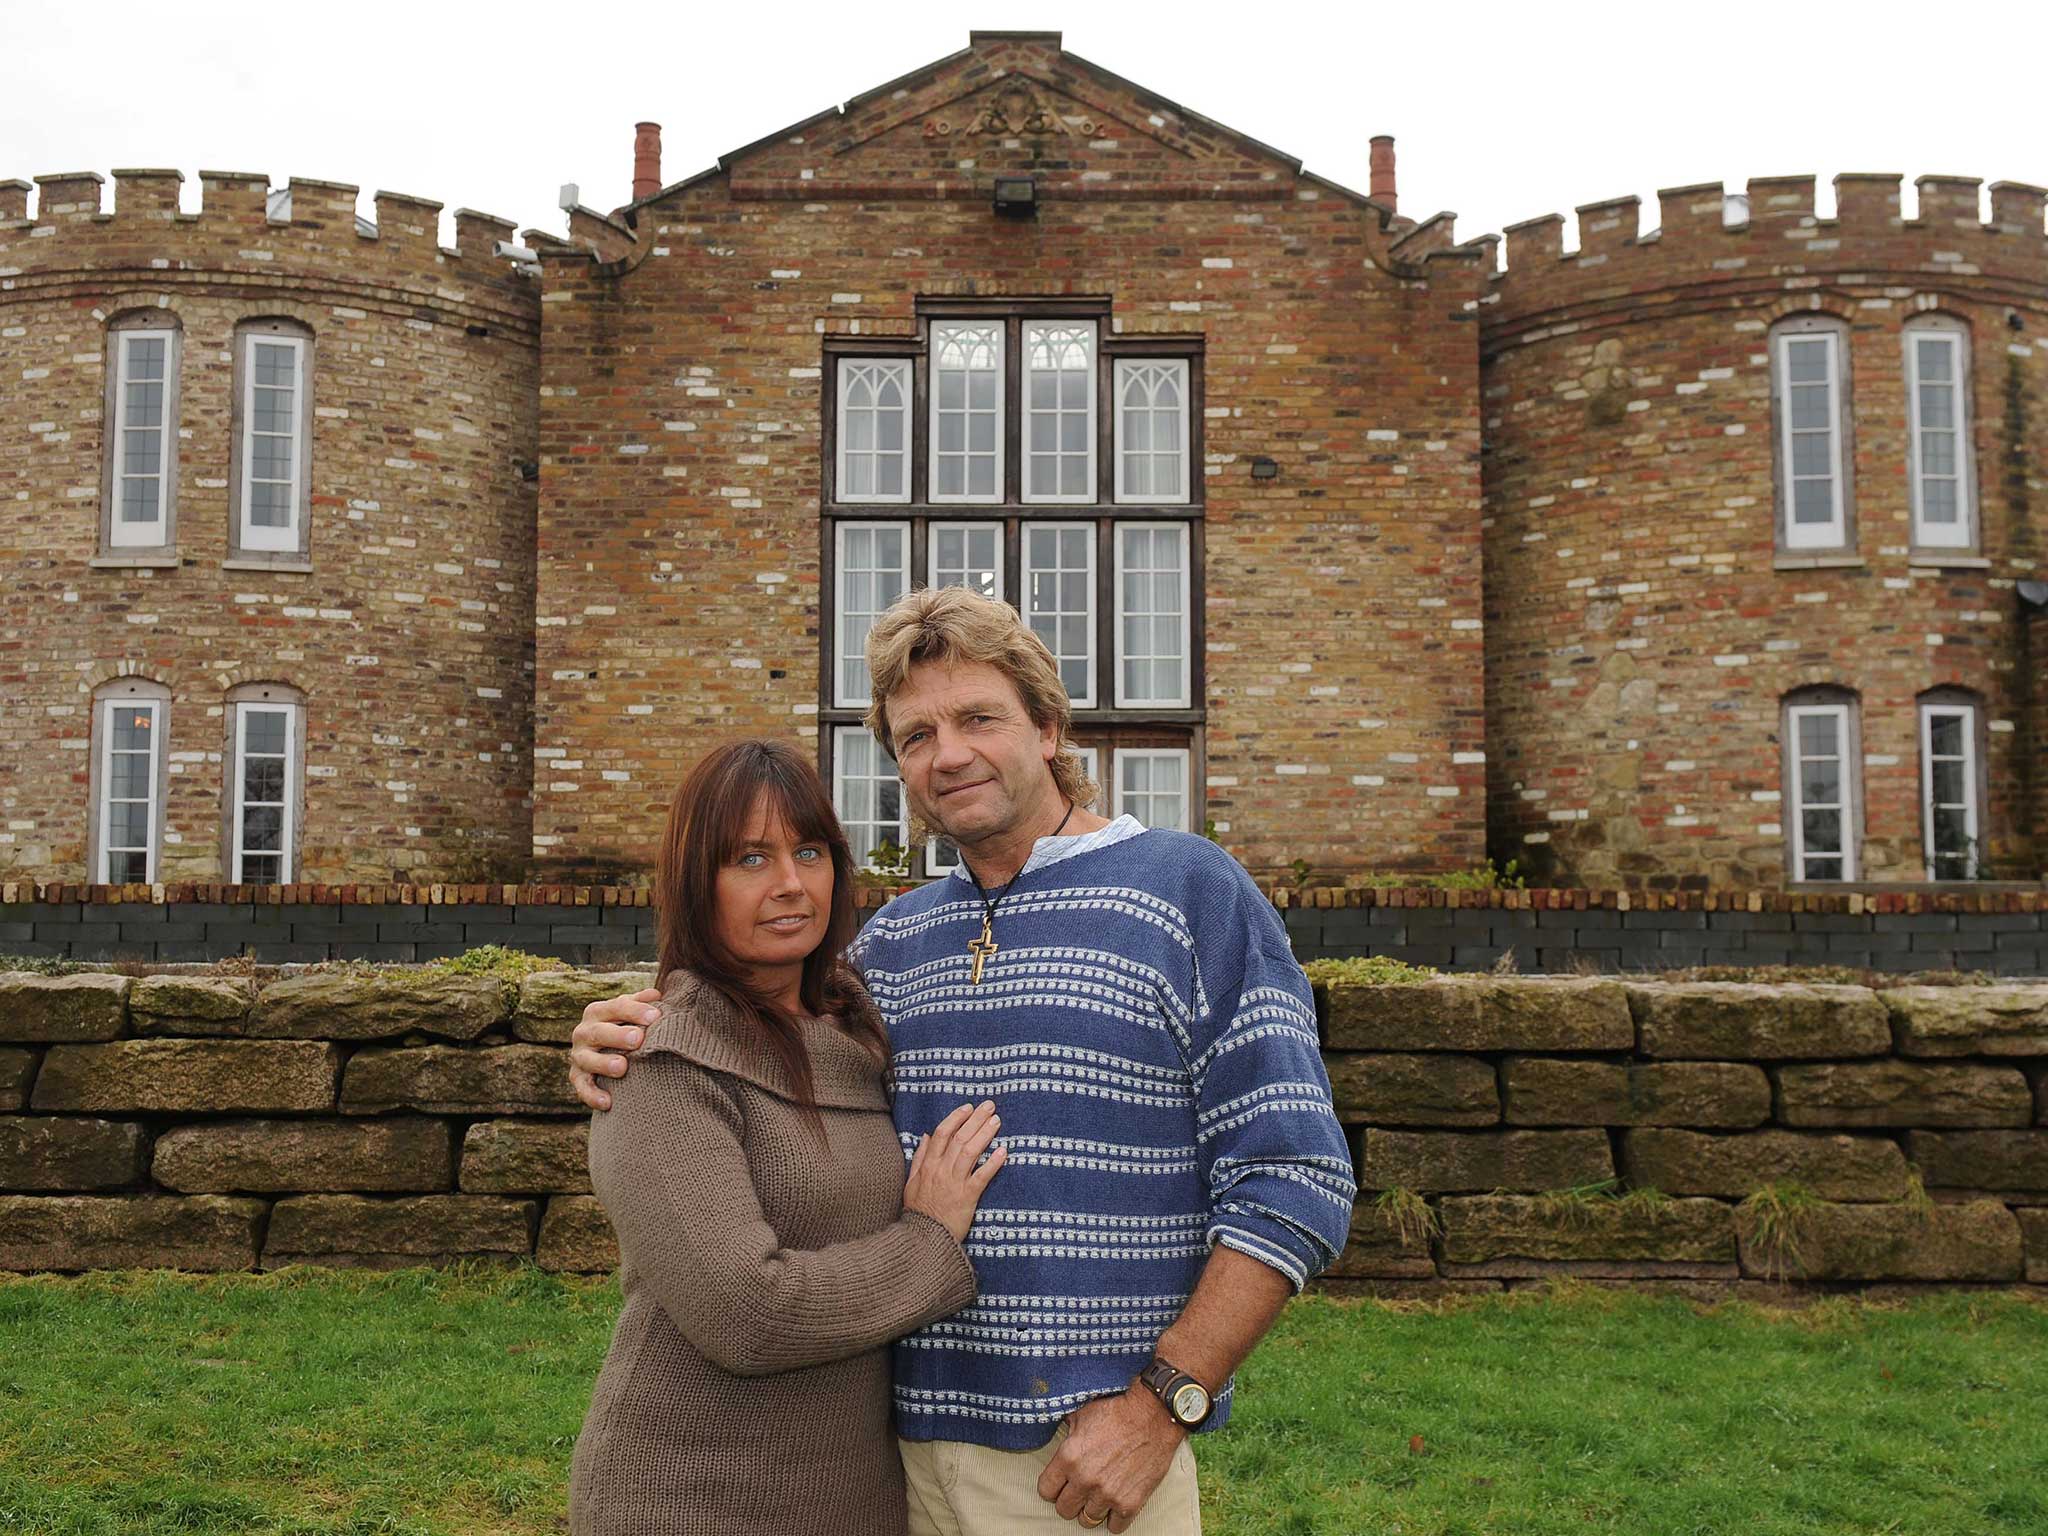 In 2000 Robert Fidler, pictured here with his wife Linda, started slowly building his dream house